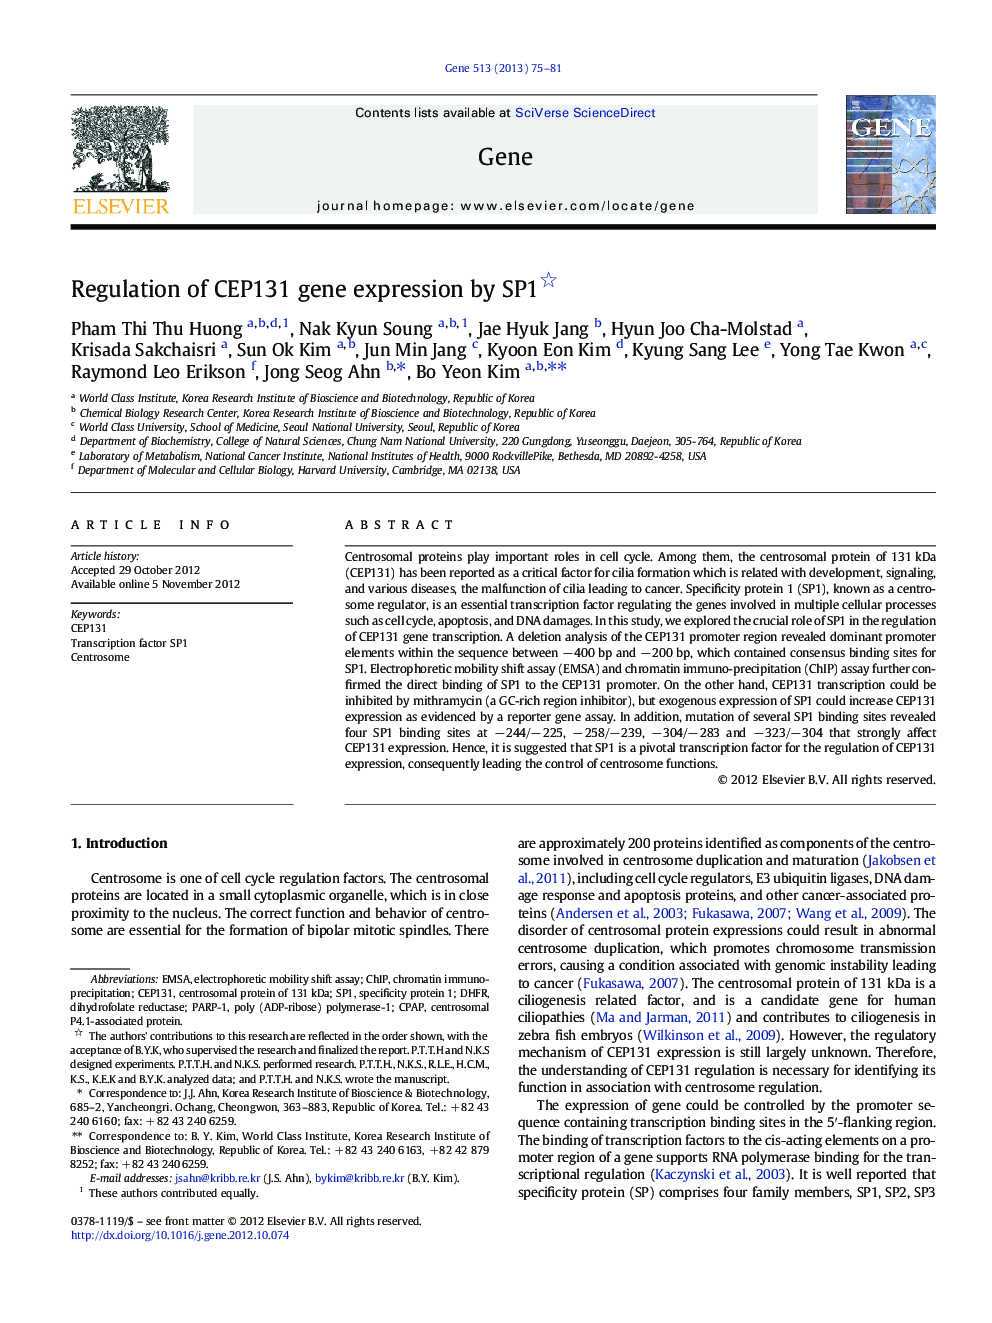 Regulation of CEP131 gene expression by SP1 